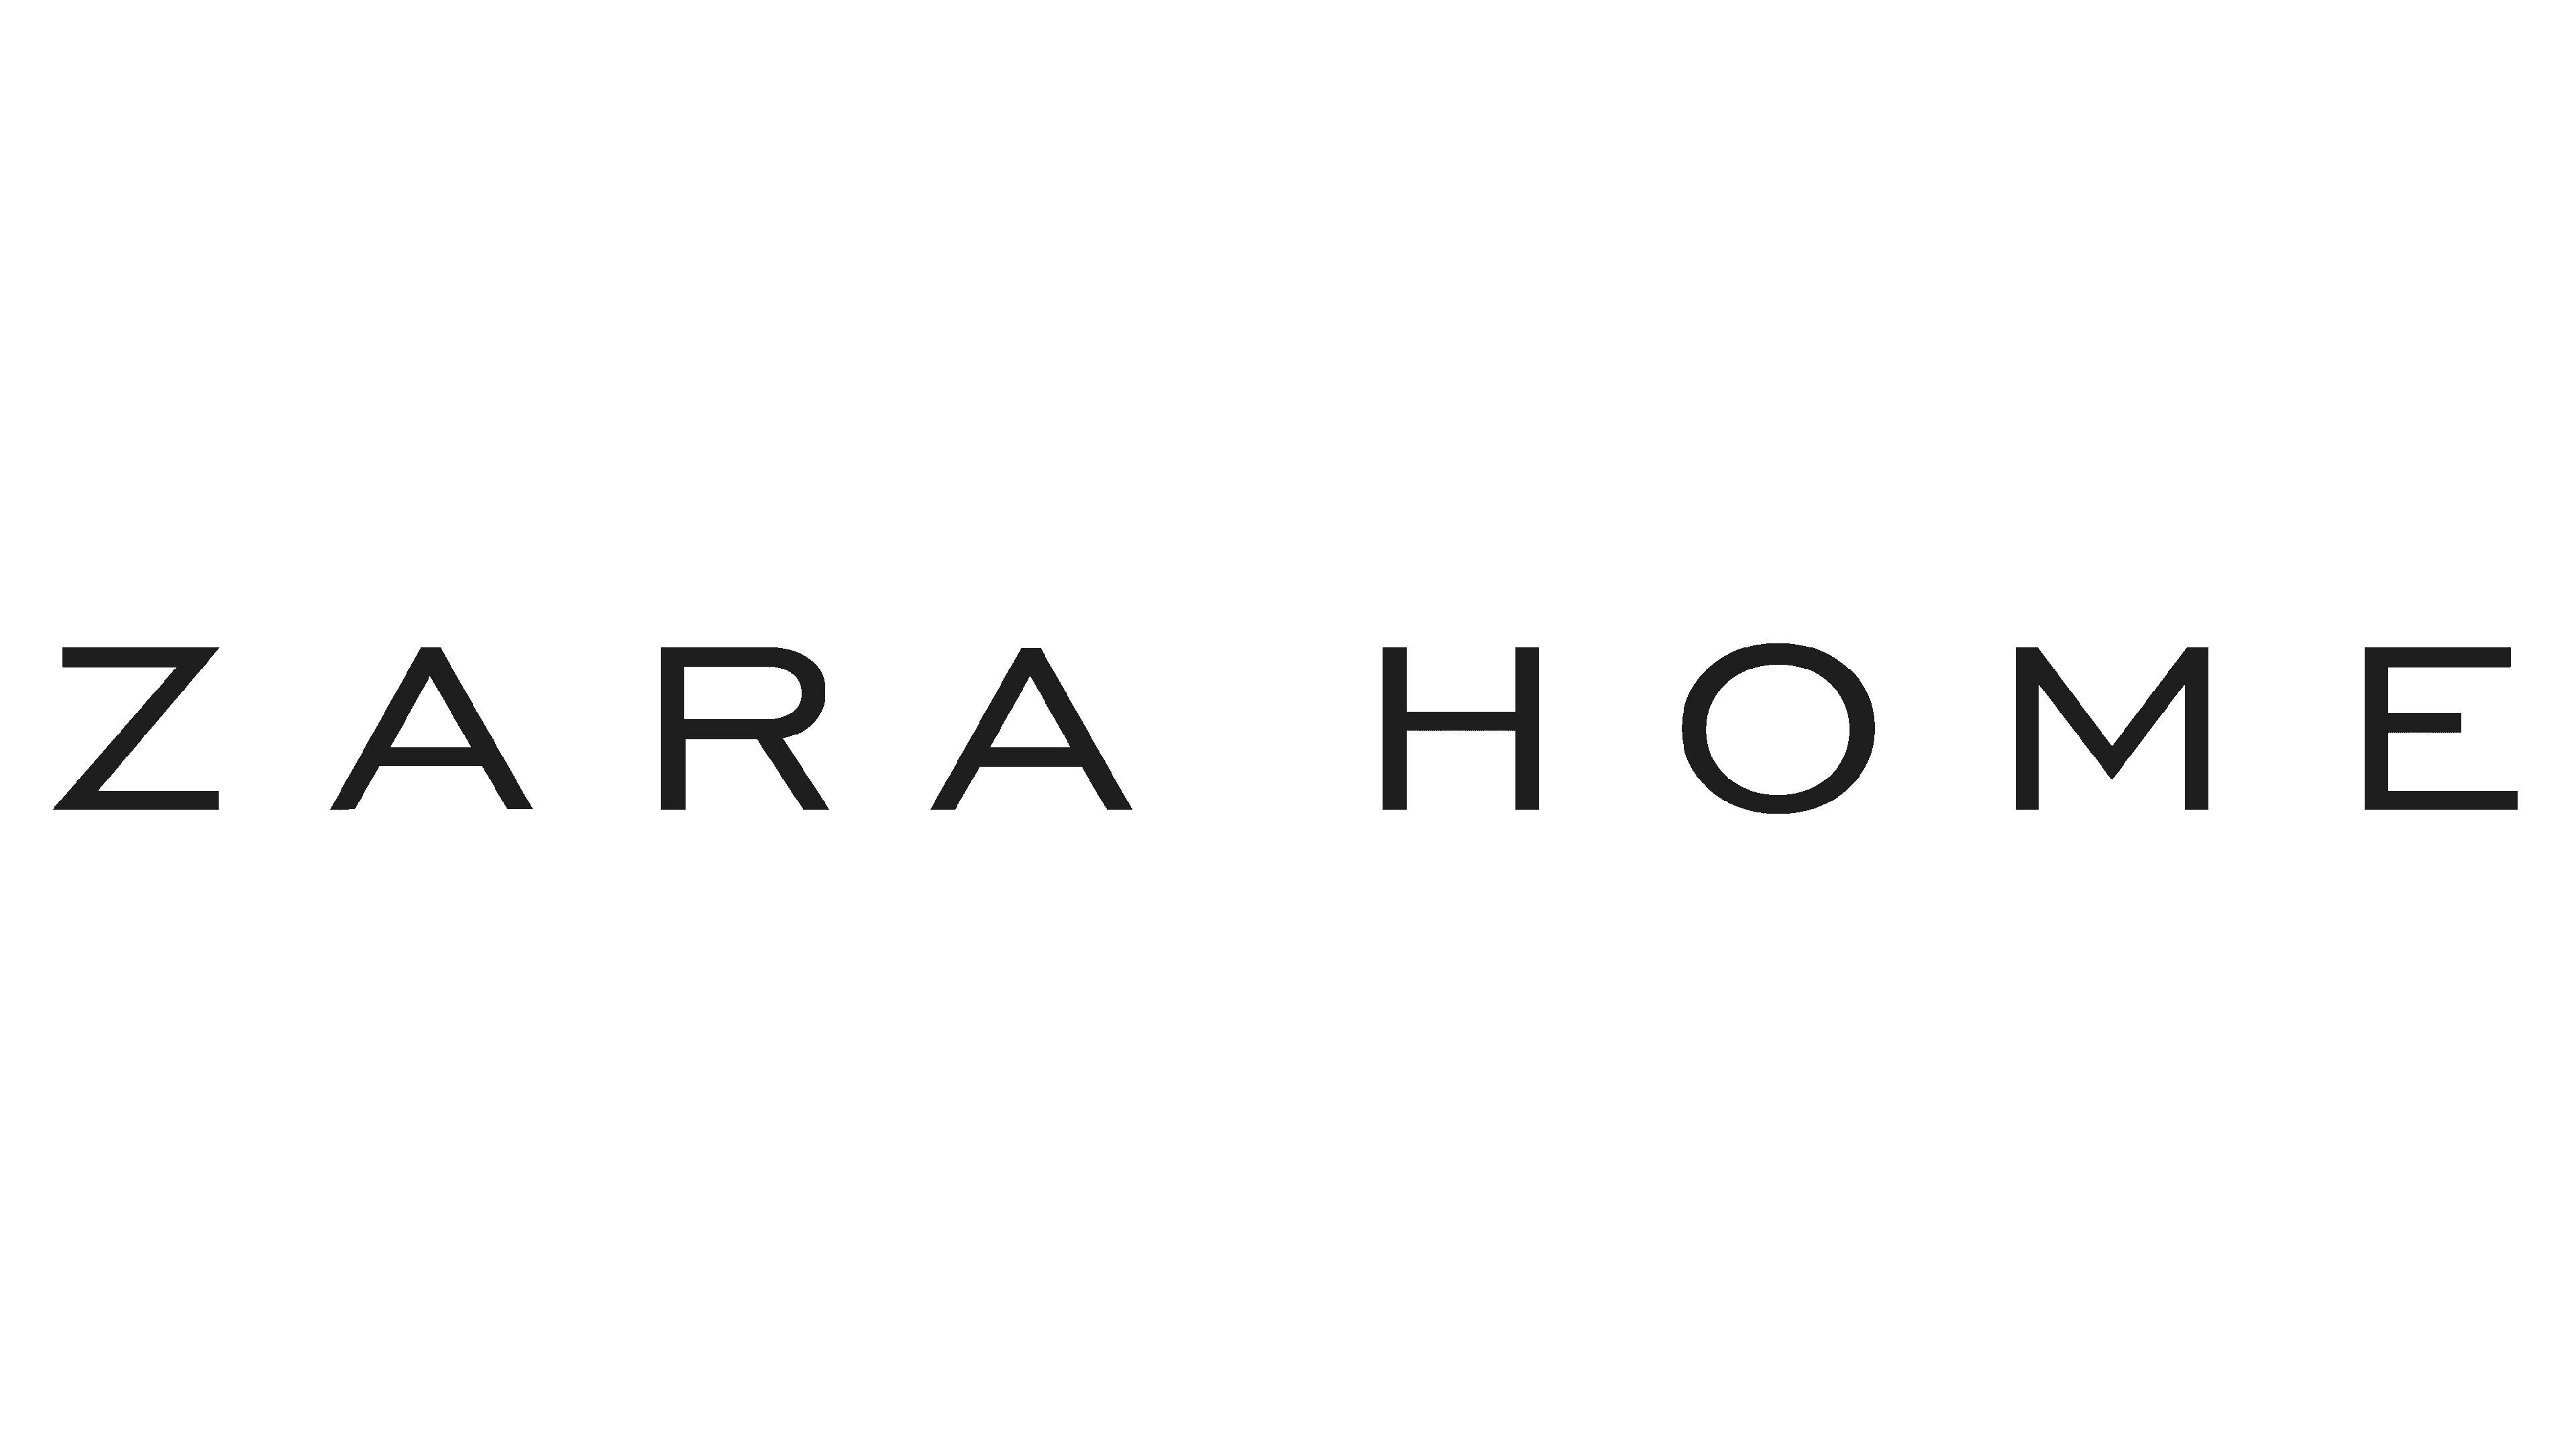 Zara Home approaches fashion after merging with Zara